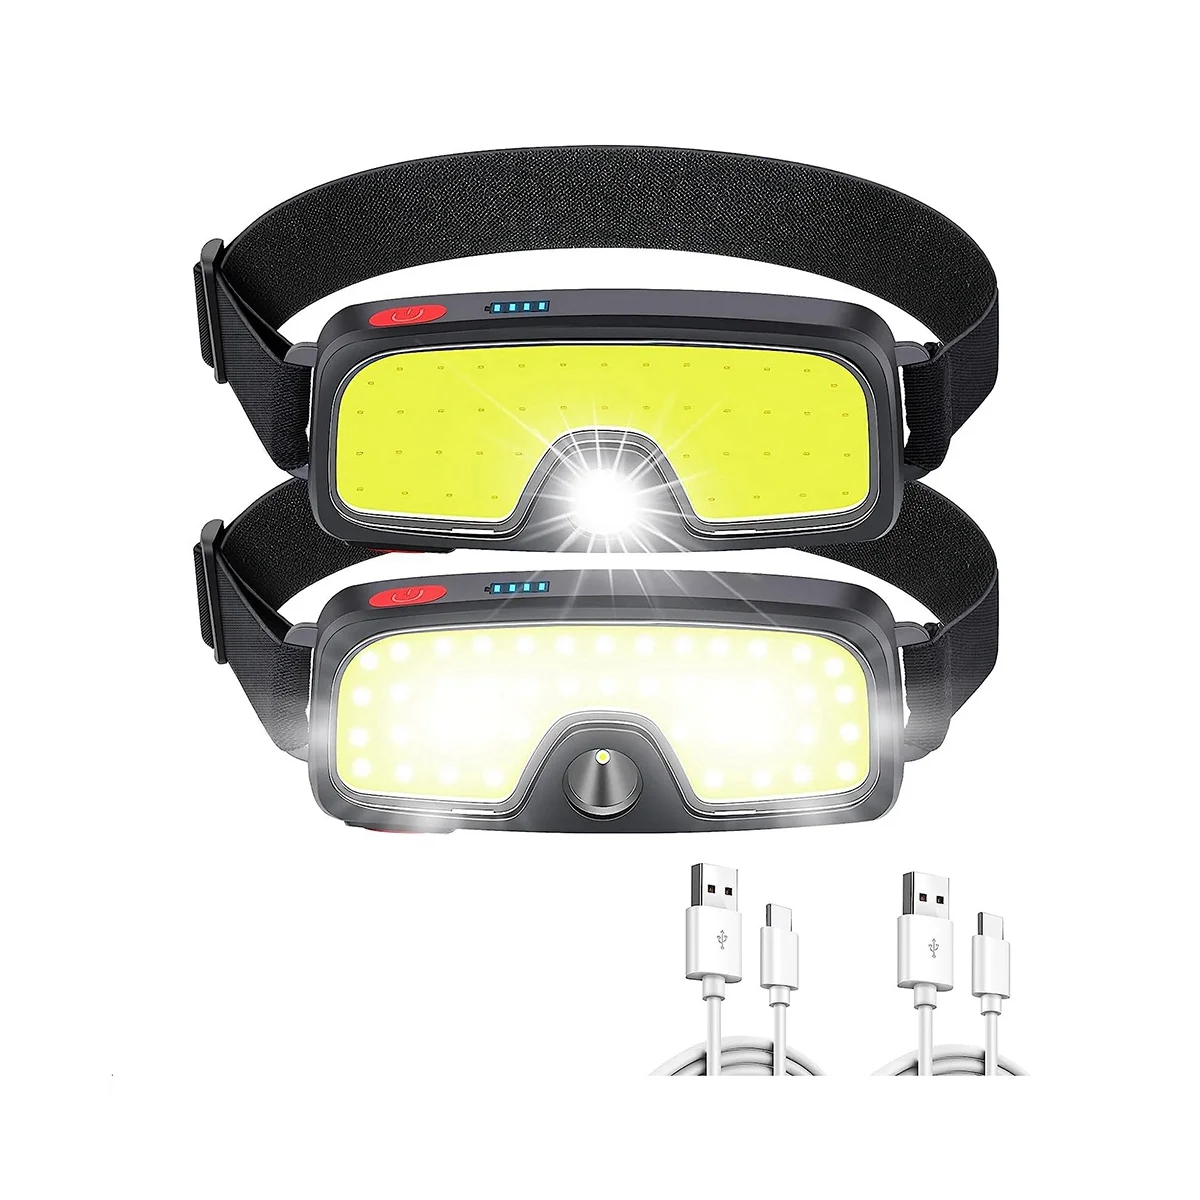 

Rechargeable head light lamp,5 Lighting Modes,Waterproof Light, Suitable for Outdoor, Running, Fishing,Camping (2 Packs)